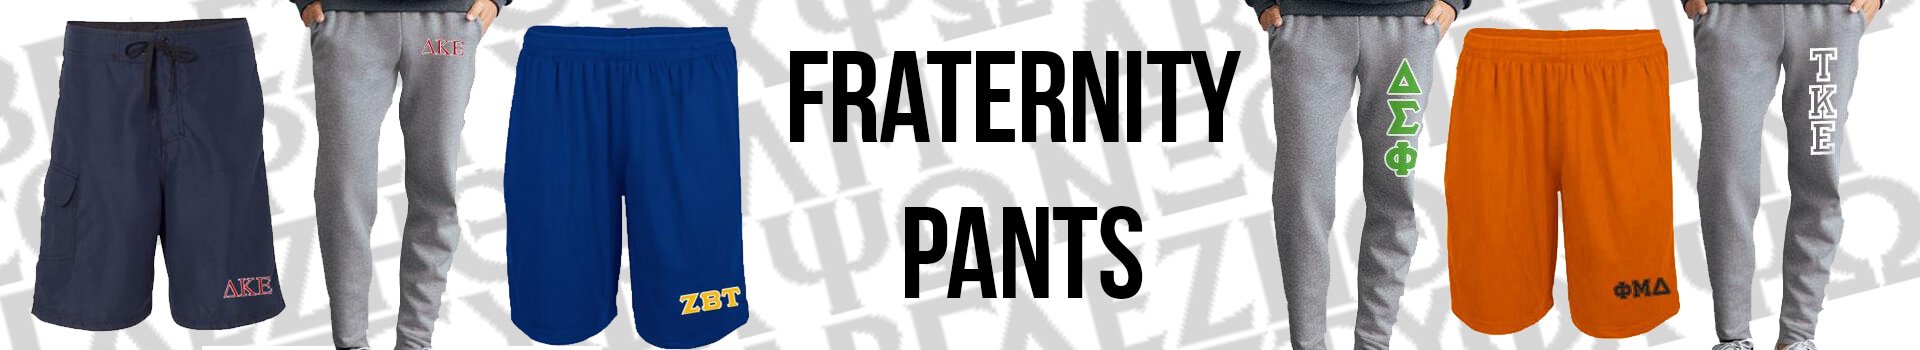 Fraternity letter pants and shorts